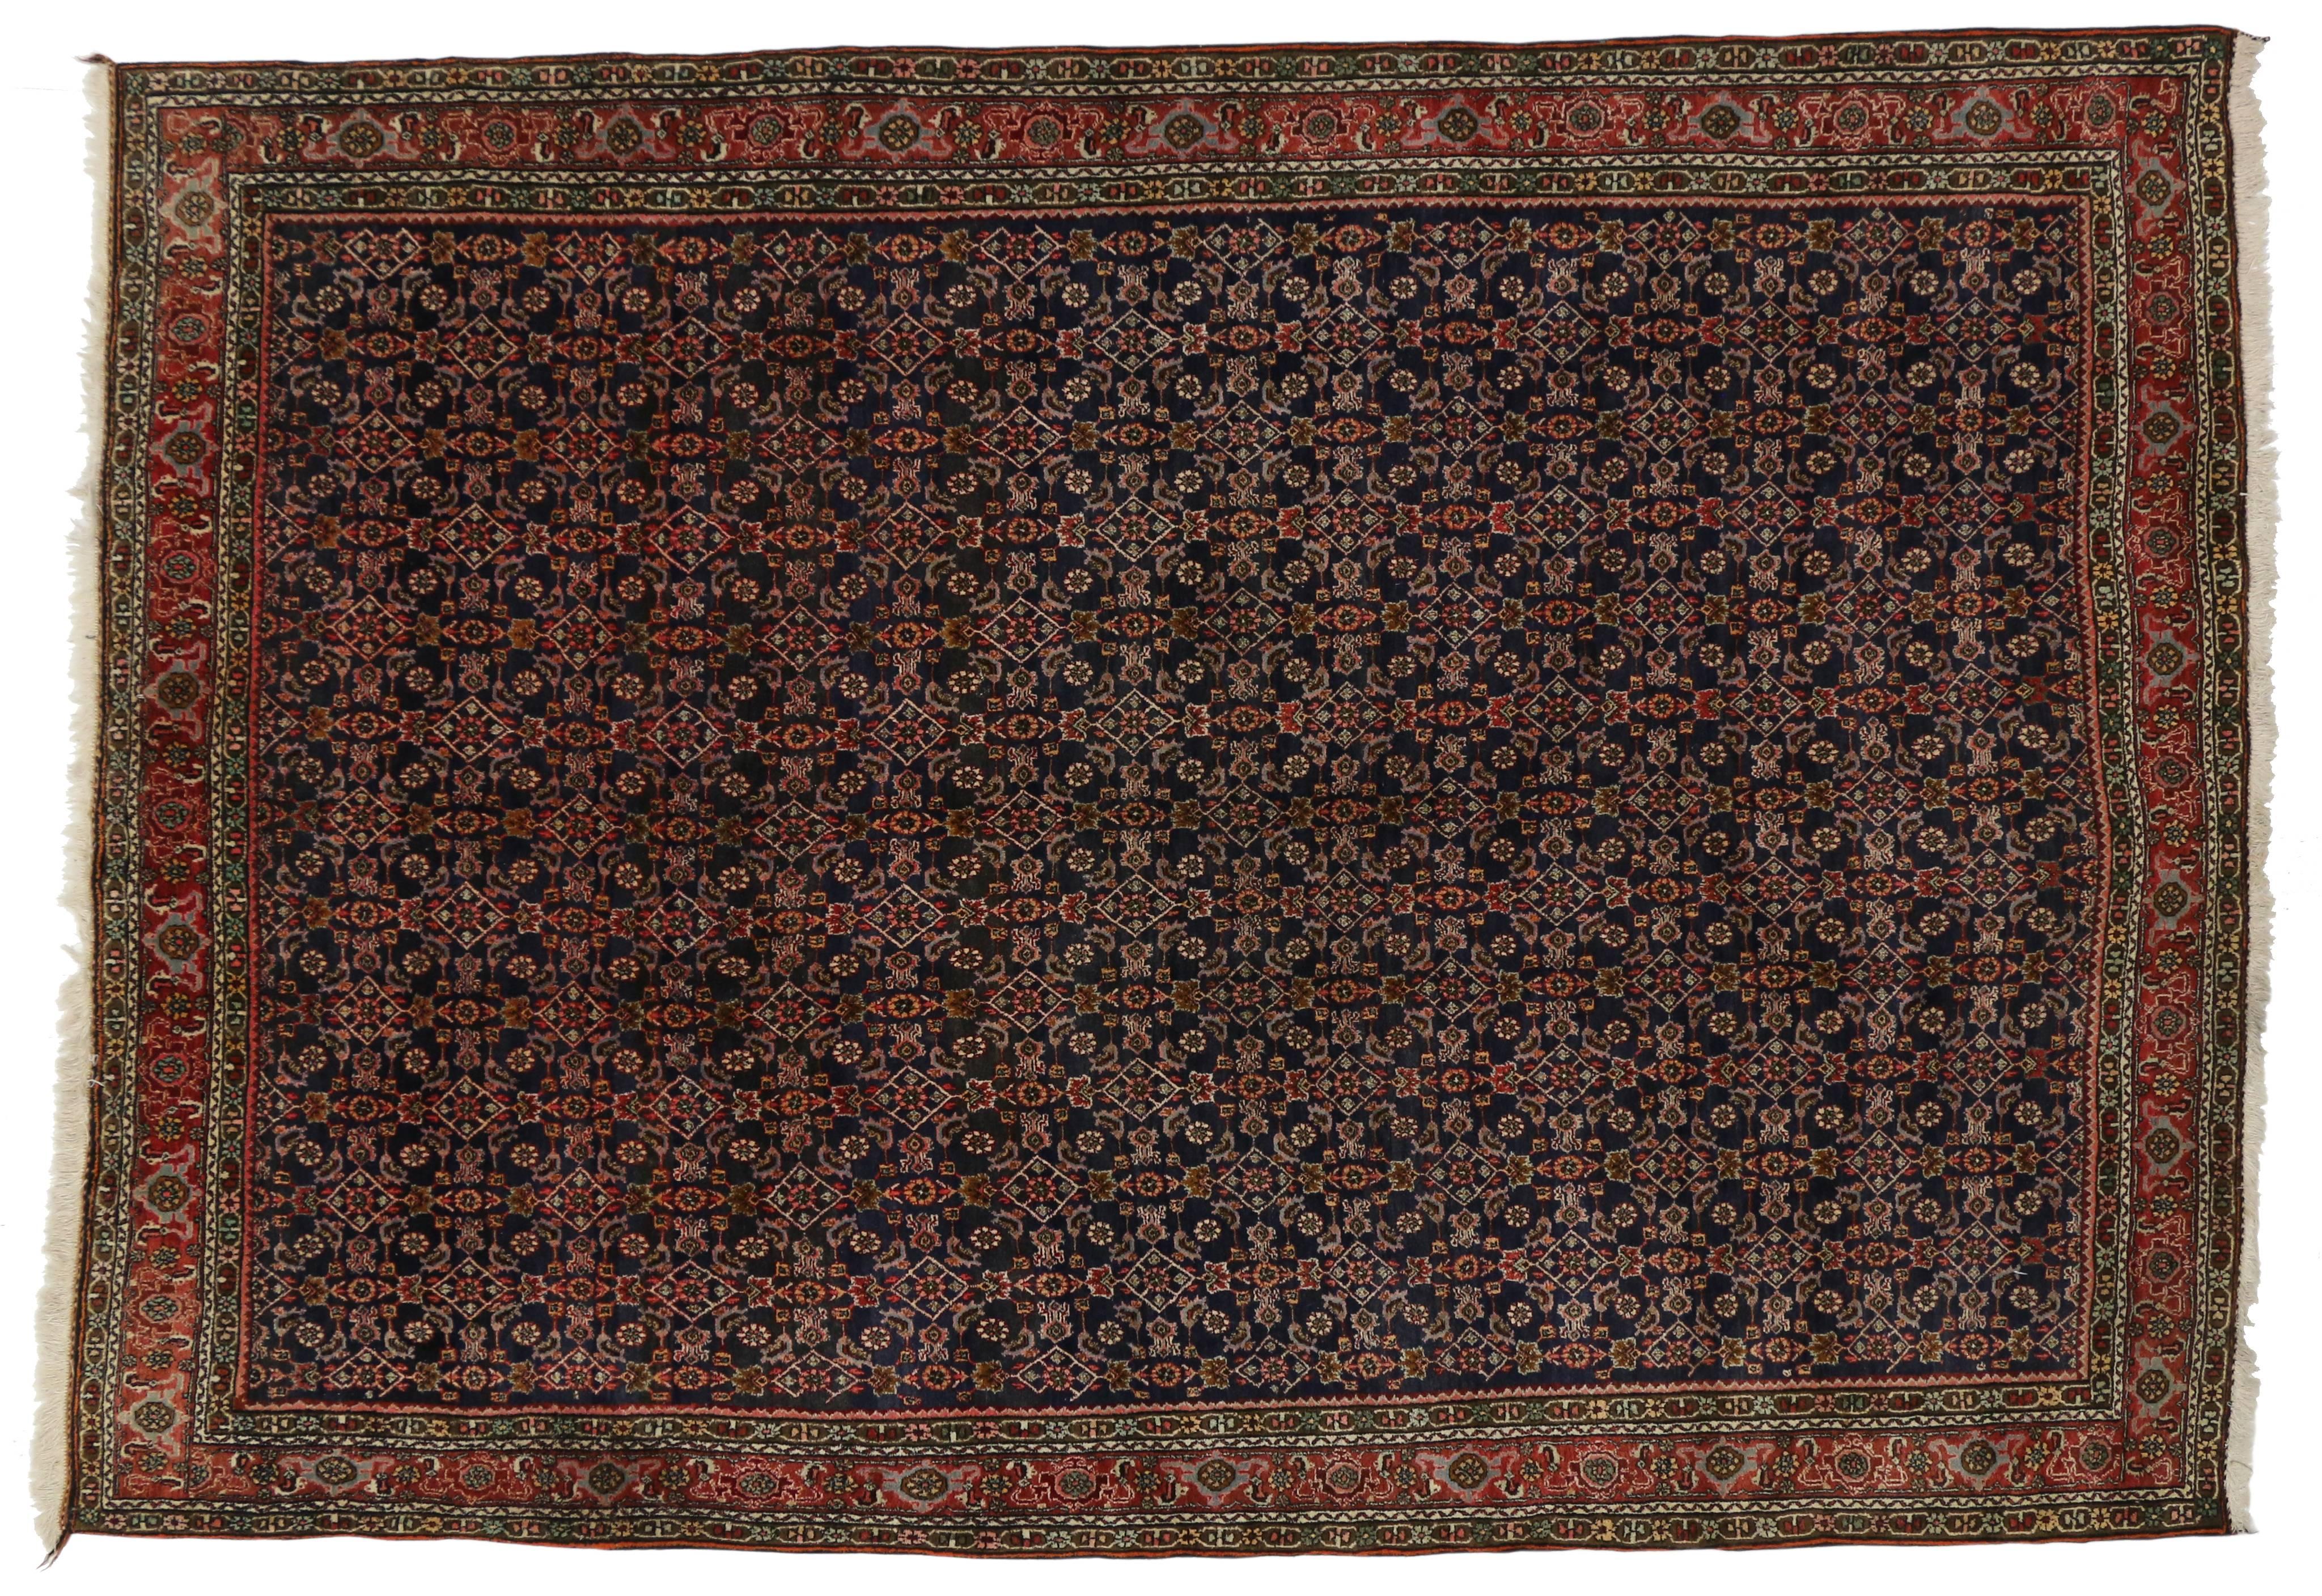 Antique Bijar Persian Rug with Modern Traditional Style, the Iron Rugs of Persia 1